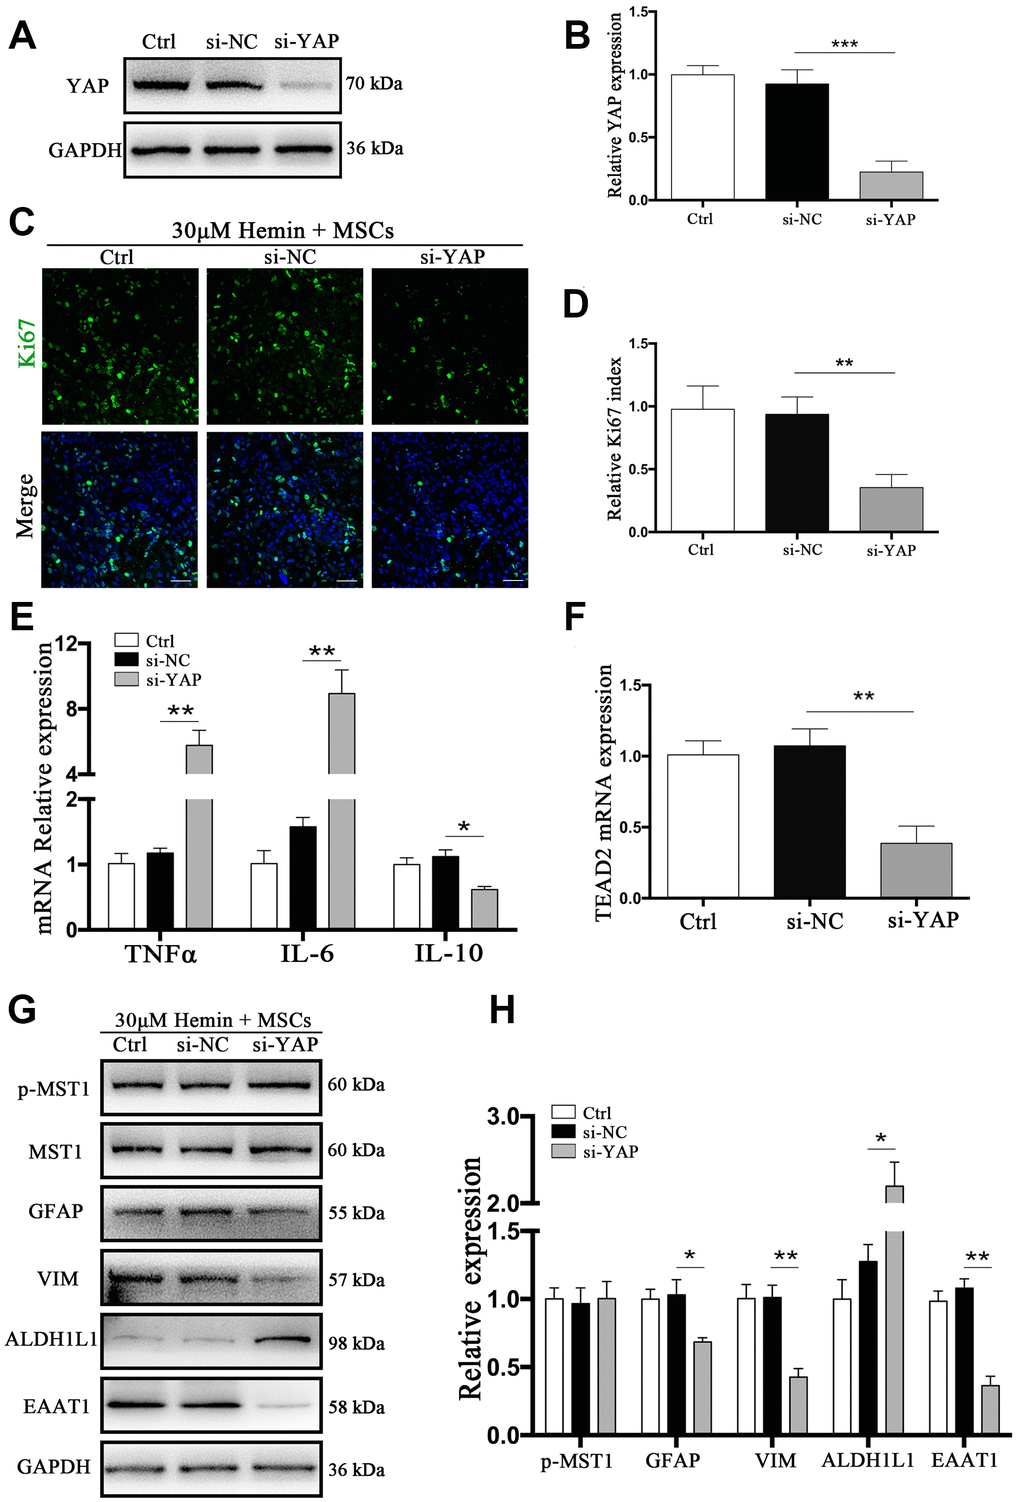 si-YAP counteracted BM-MSCs coculture induced cell proliferation and GFAP/VIM switching. (A) Western blotting analysis of YAP expression in ctrl, si-NC, and si-Nrf2 transfected astrocytes. (B) The results of densitometric analysis of the bands were plotted as mean ± SD (n = 4). Over 83% of YAP expression was suppressed by si-YAP. ***p C) Representative pictures of Ki67 immunofluorescence staining. Ki67-positive cells were labeled in green. Bar = 50μm. (D) The results of the proliferation rate and densitometric analysis of the bands were plotted into a histogram of five randomly fields. (E). mRNA expression of TNFα, IL-6, and IL-10 was checked. (F) mRNA expression of TEAD2 was checked. (G, H) Western blotting analysis of p-MST1, MST1, GFAP, VIM, ALDH1L1, and EAAT1 protein expression was examined. The relative expression was normalized to control. The results of densitometric analysis of the bands were plotted as mean ± SD (n = 4). *p p 